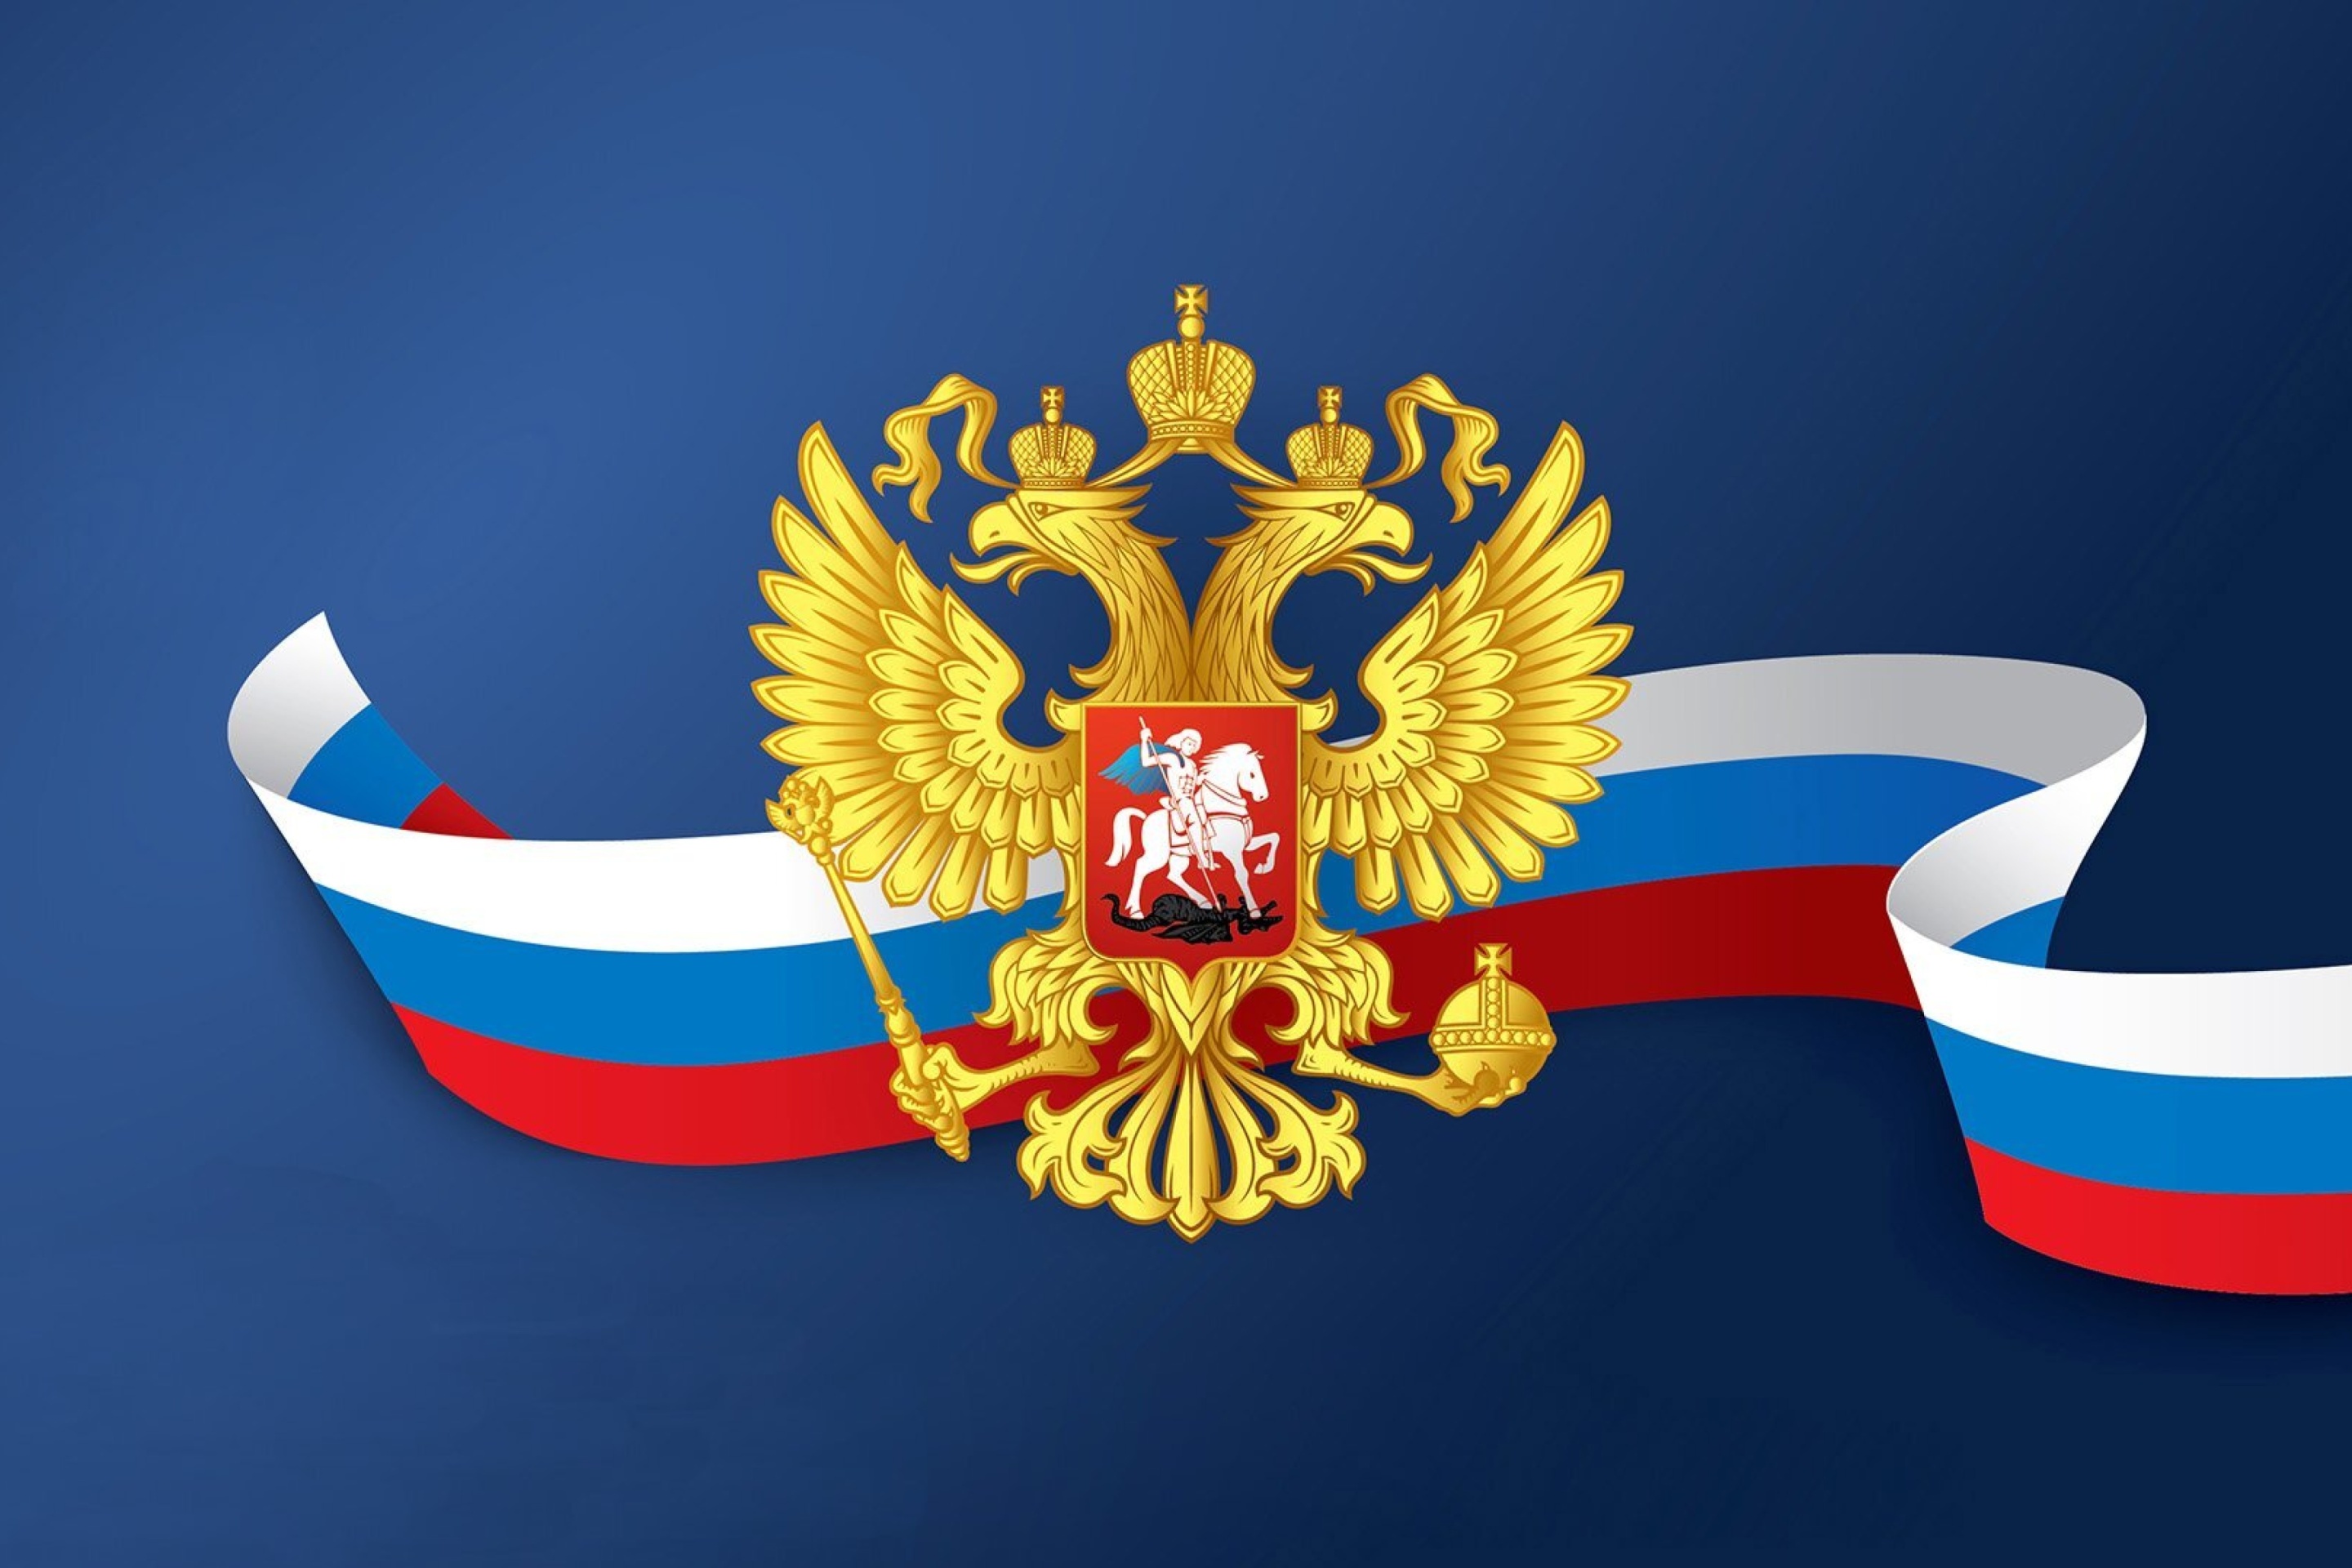 Обои Russian coat of arms and flag 2880x1920